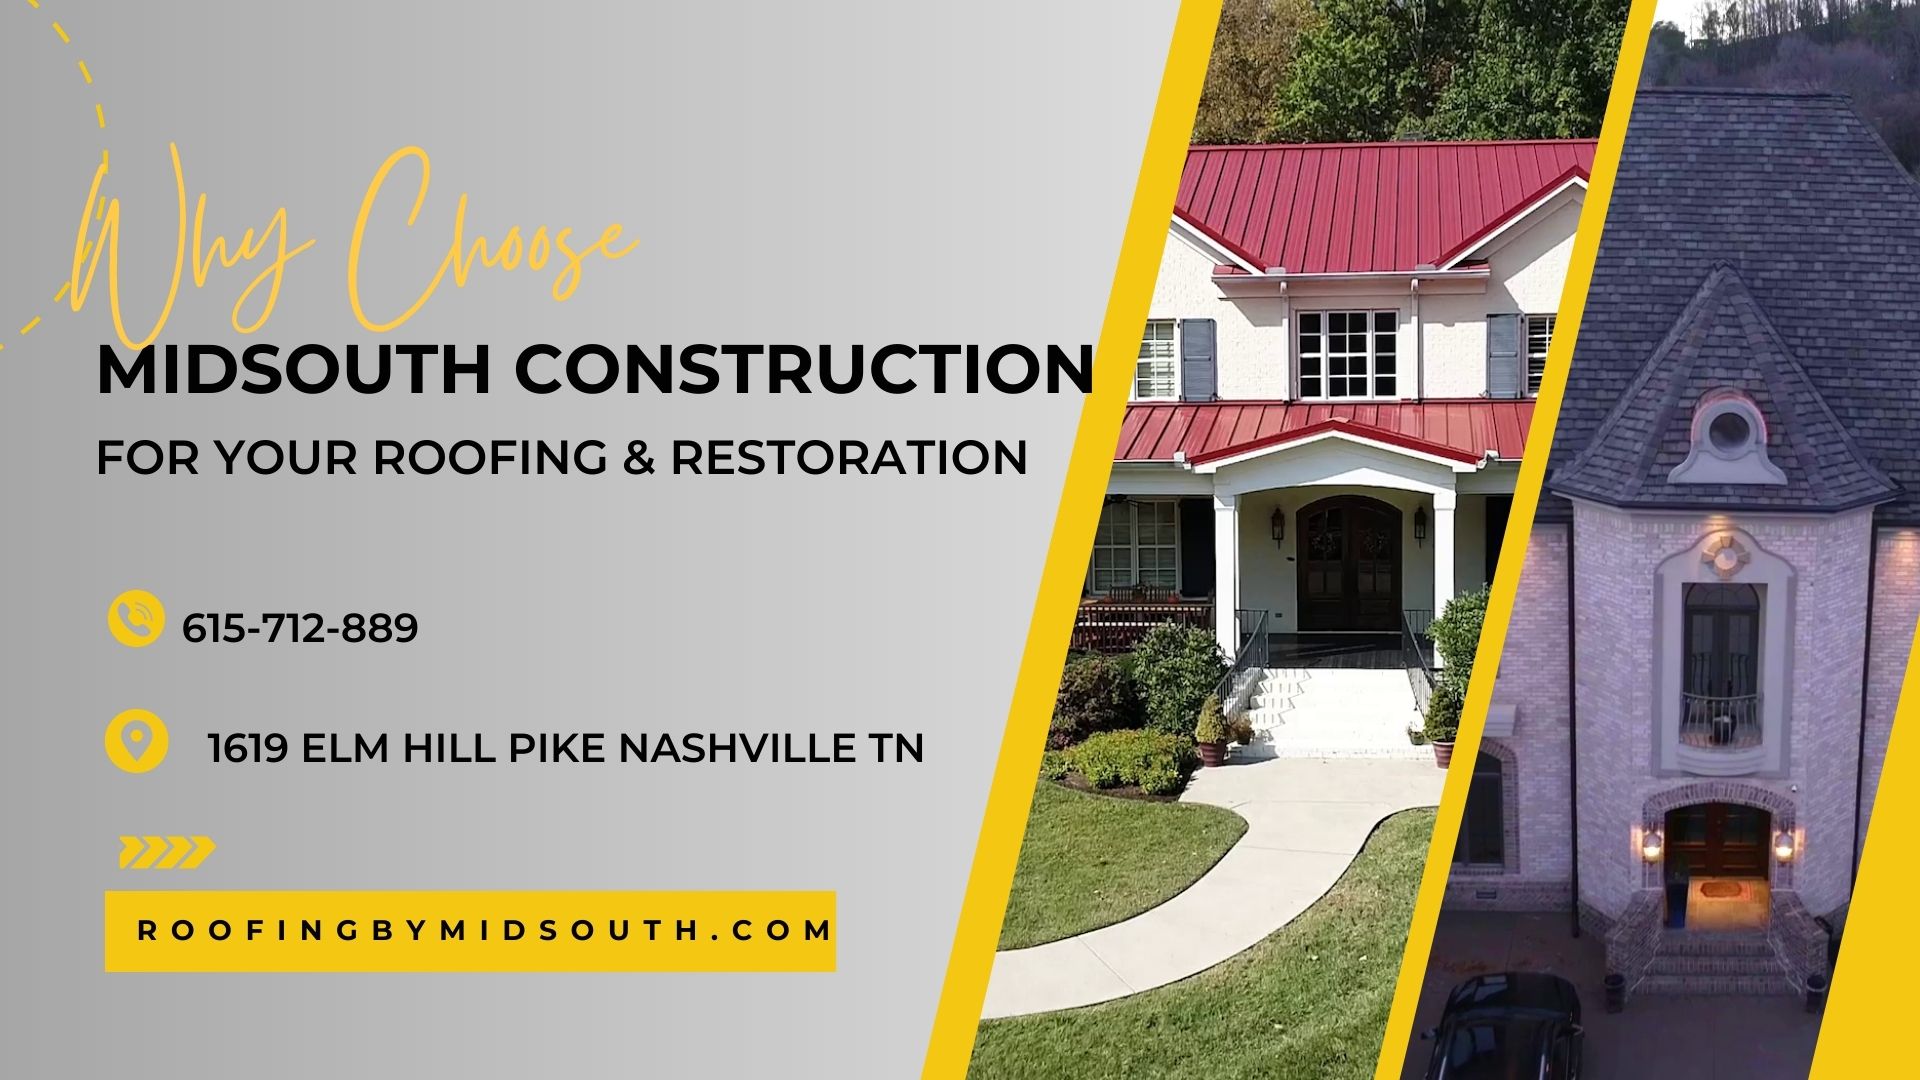 Why Choose MidSouth Construction